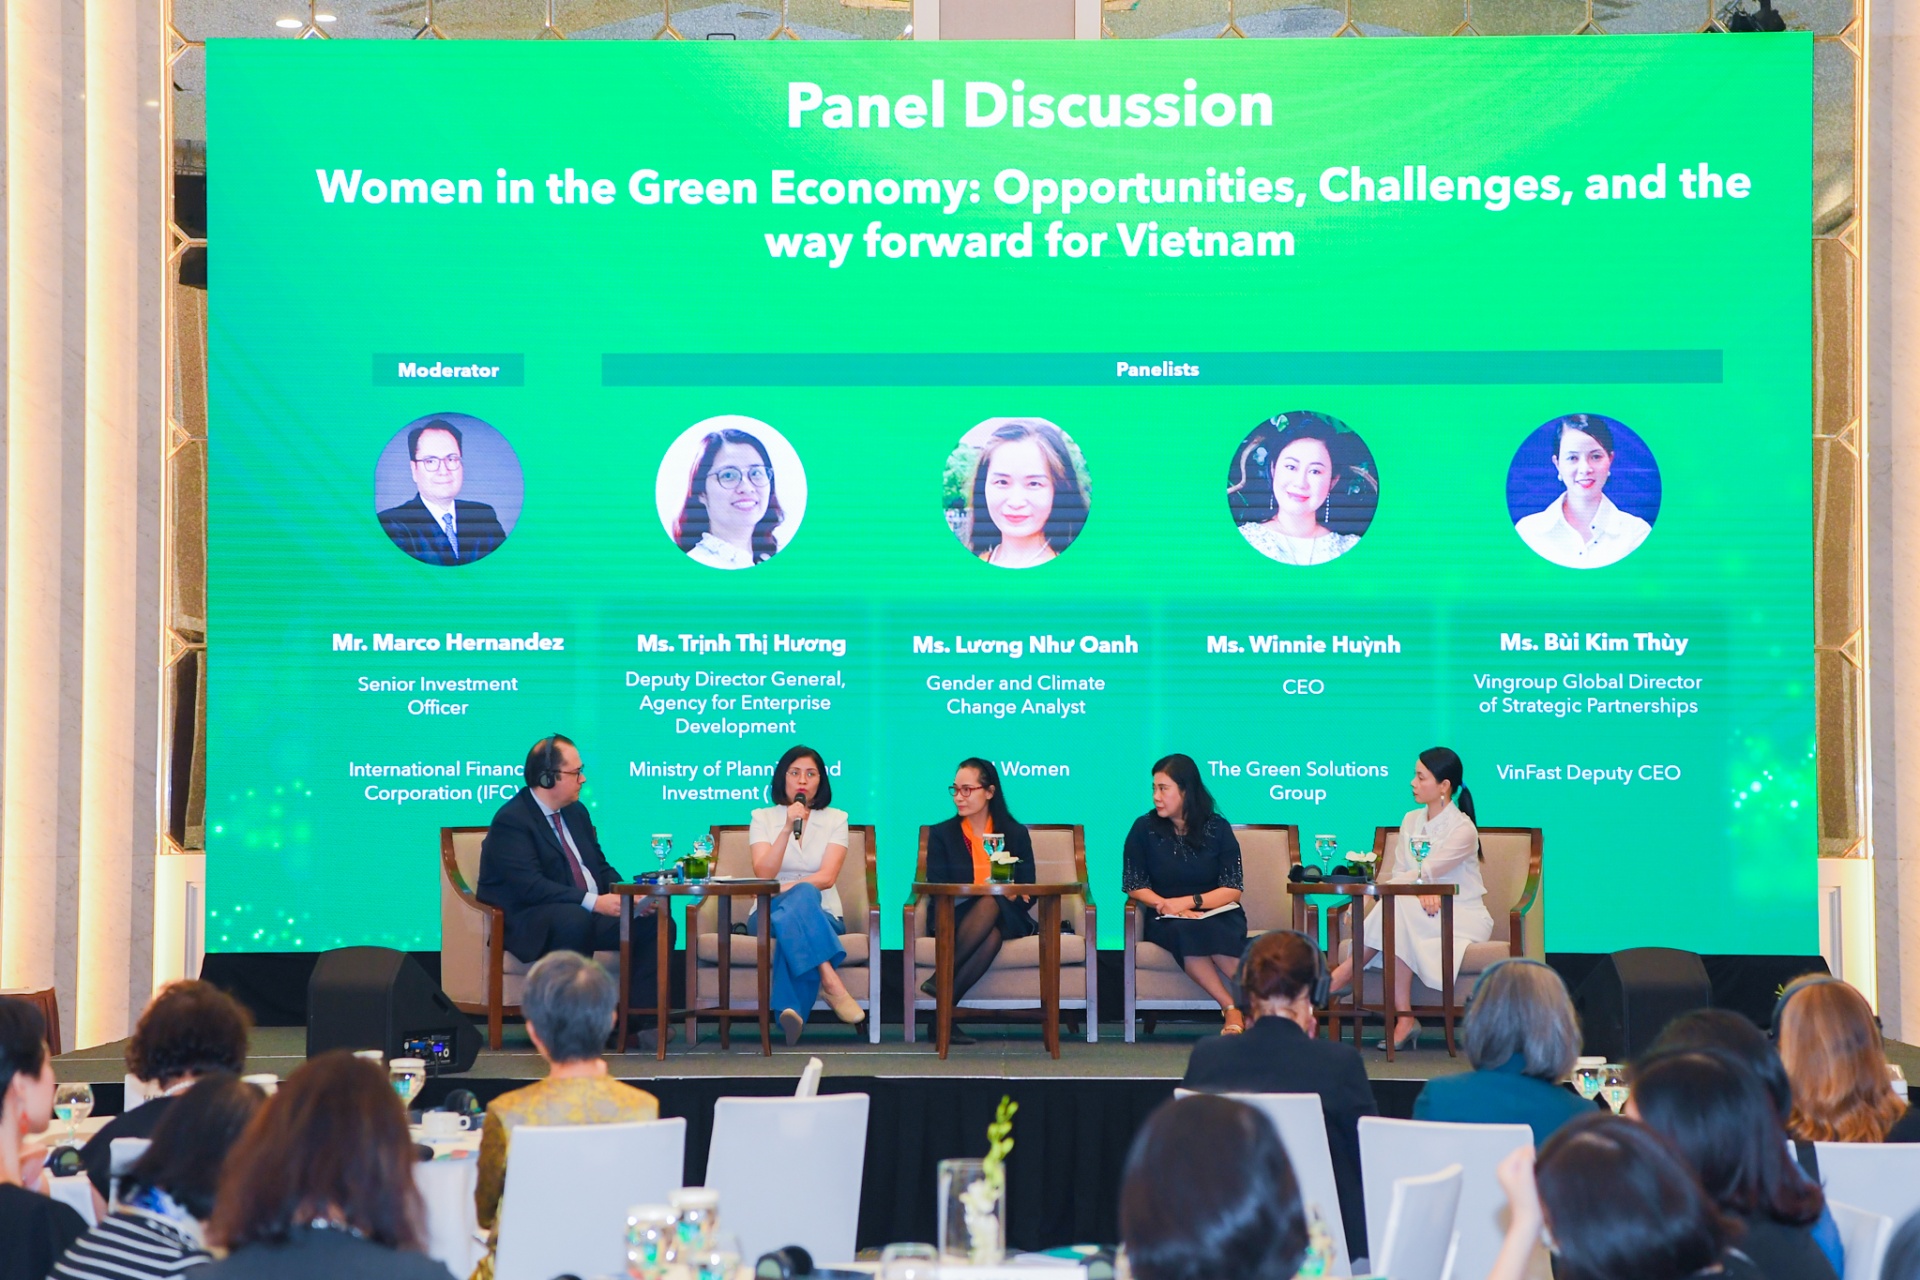 Climate Leaders Network aims to elevate role of women in green economy